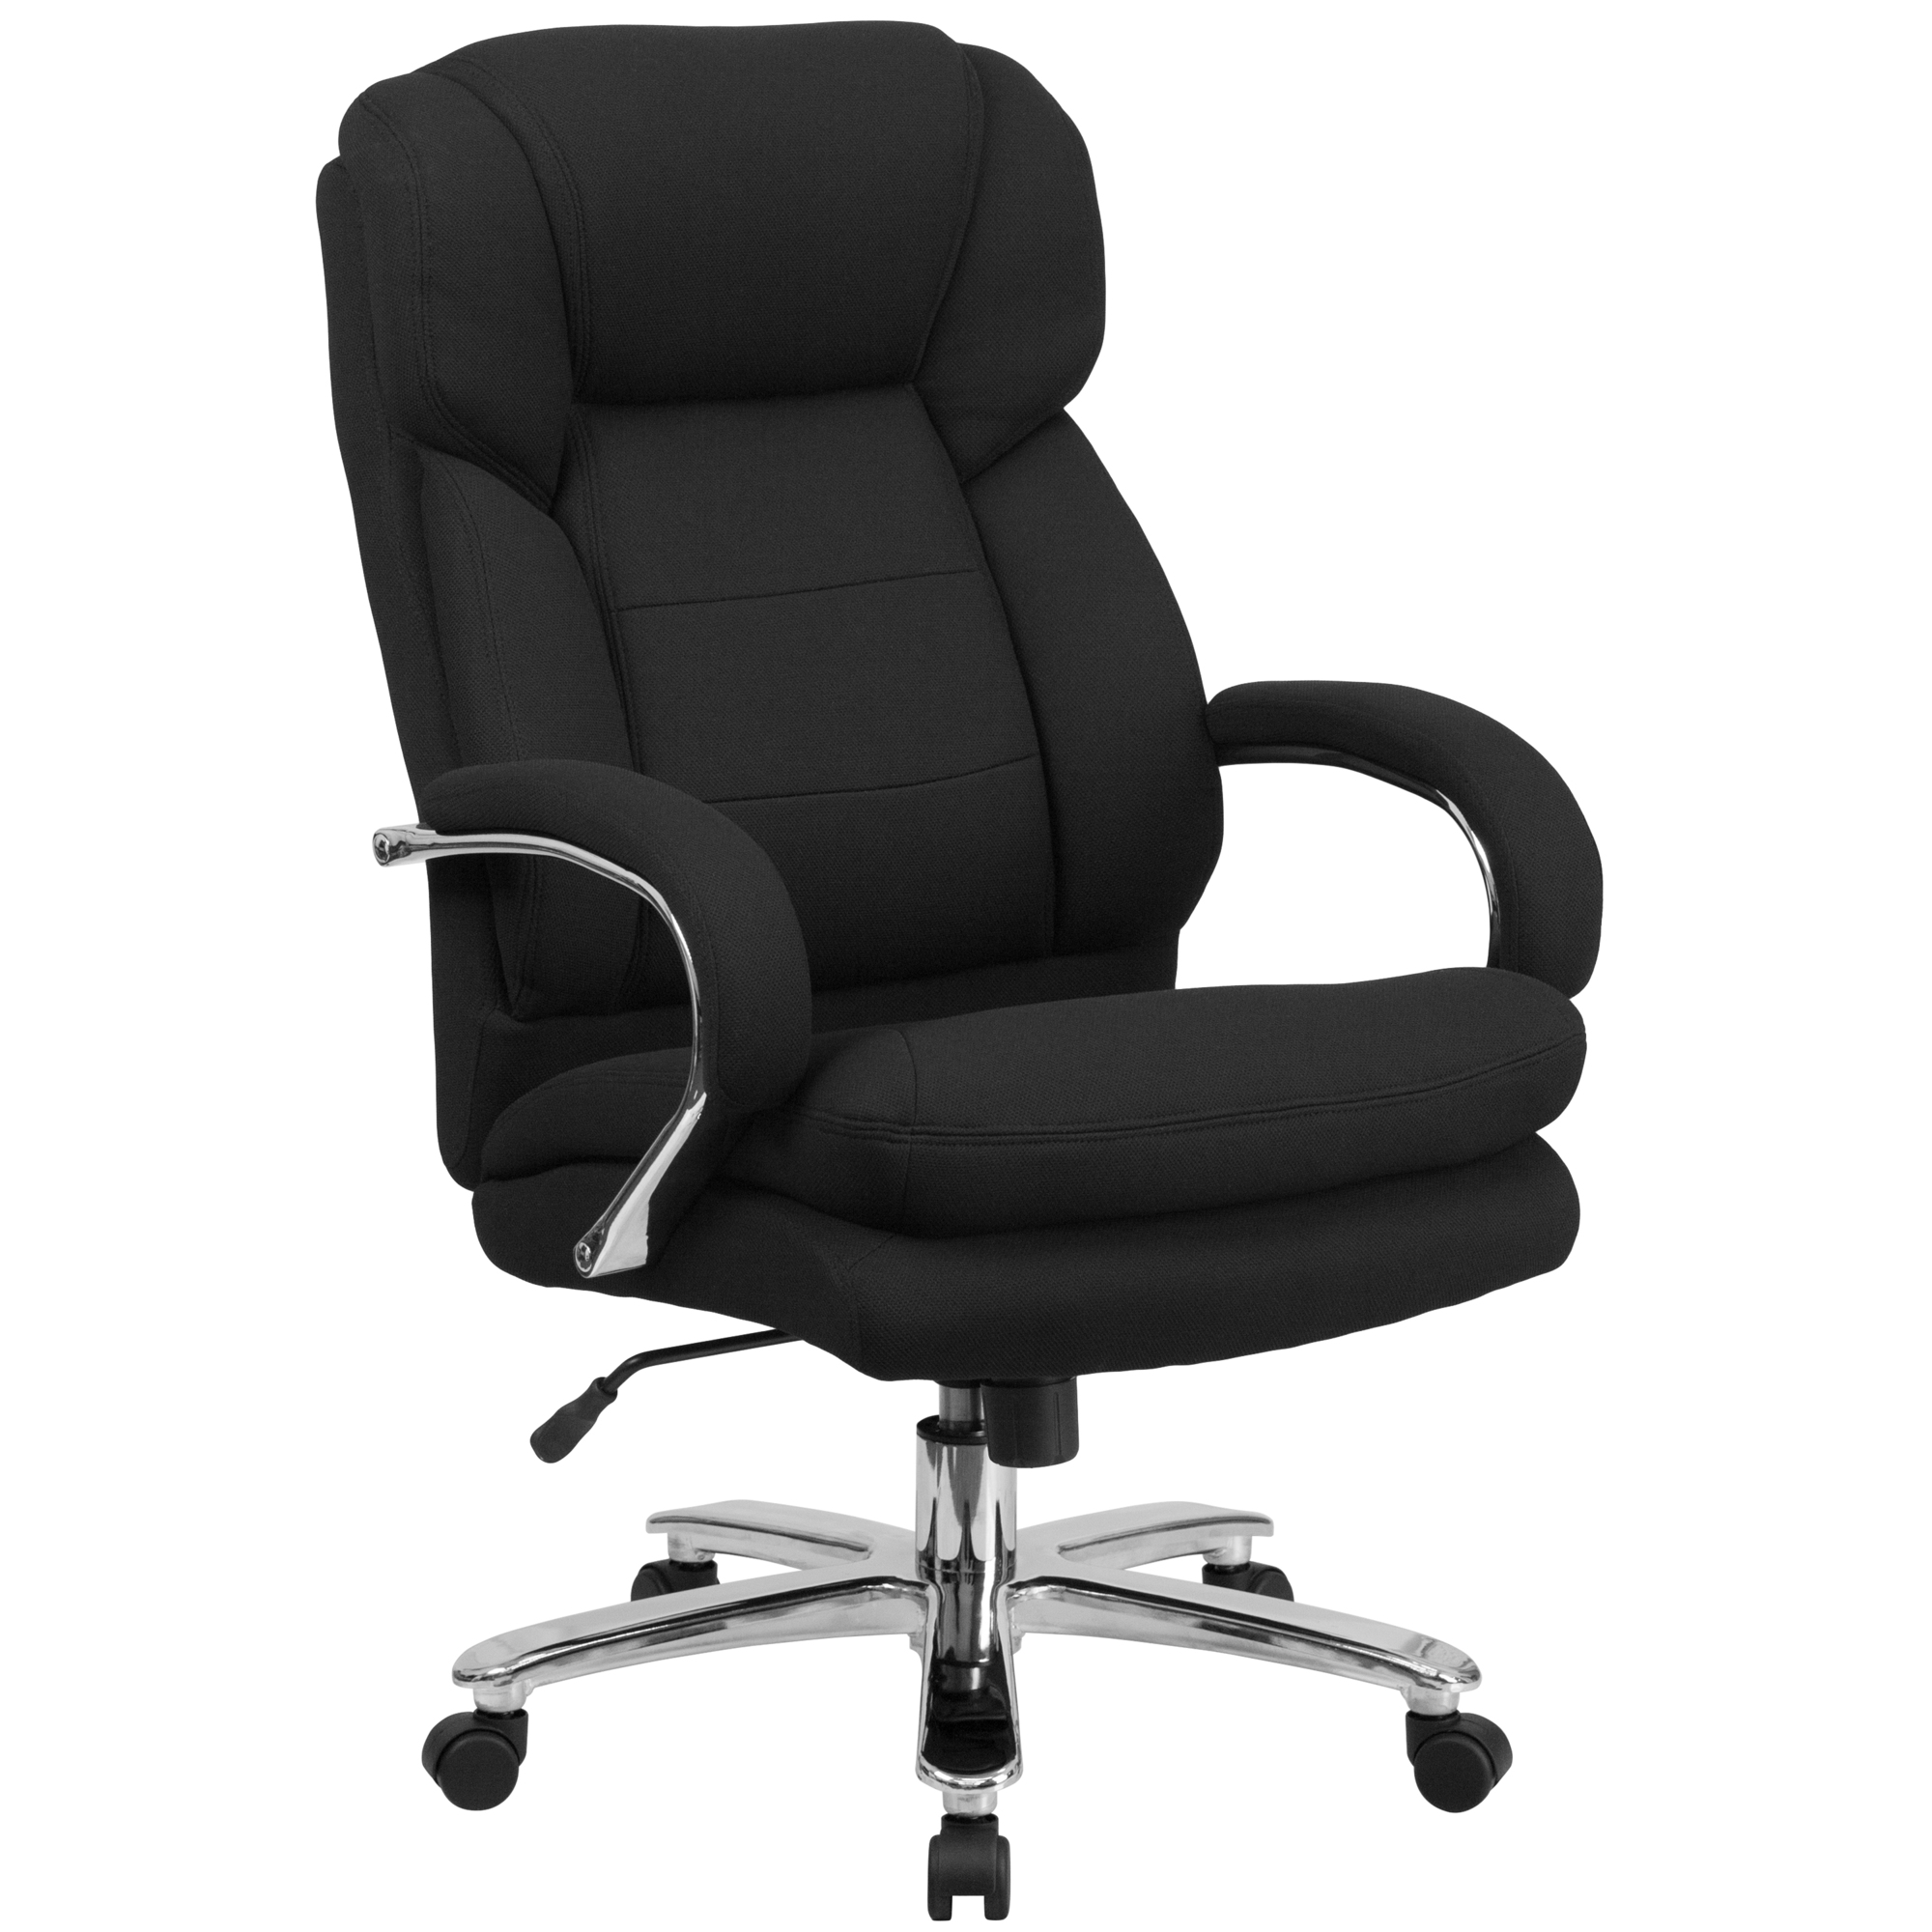 Flash Furniture, 500 lb. Rated Black Fabric Ergonomic Office Chair, Primary Color Black, Included (qty.) 1, Model GO2078